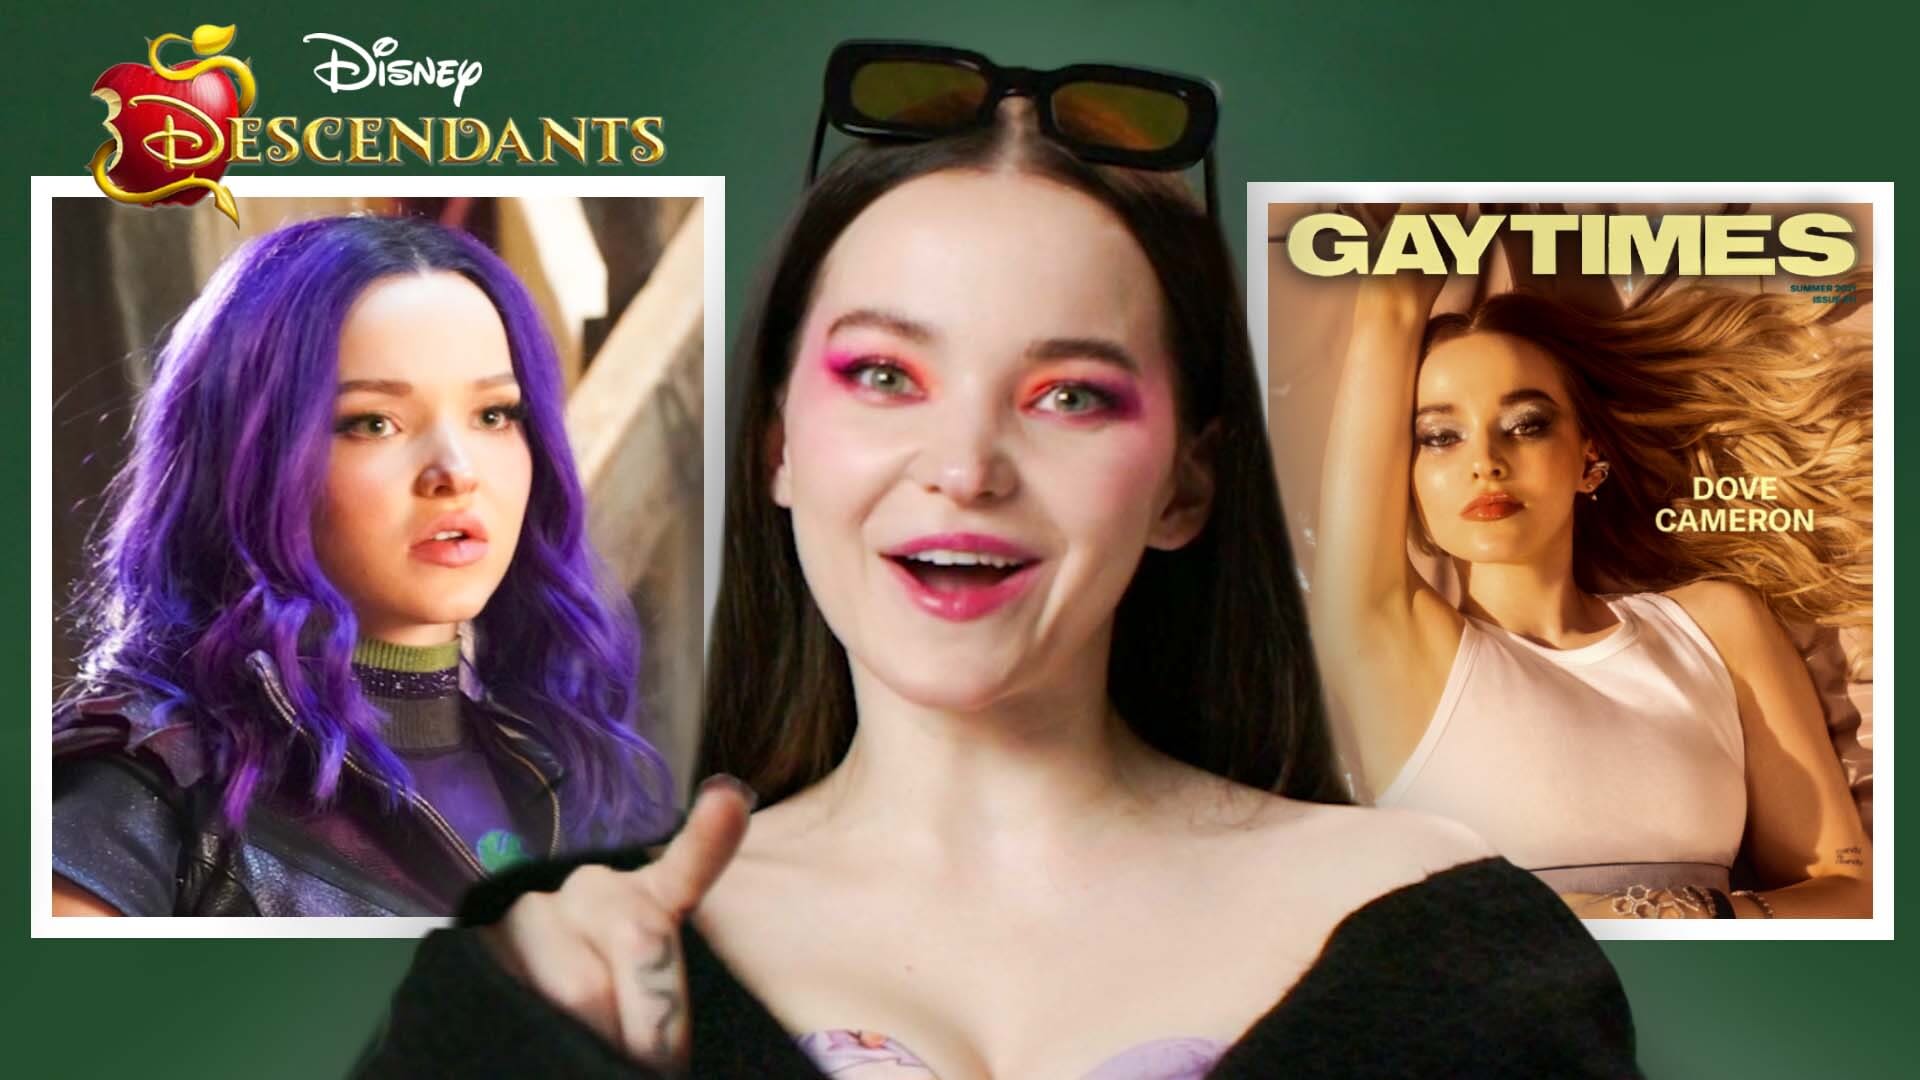 Watch Dove Cameron on Her Disney Career, Coming Out